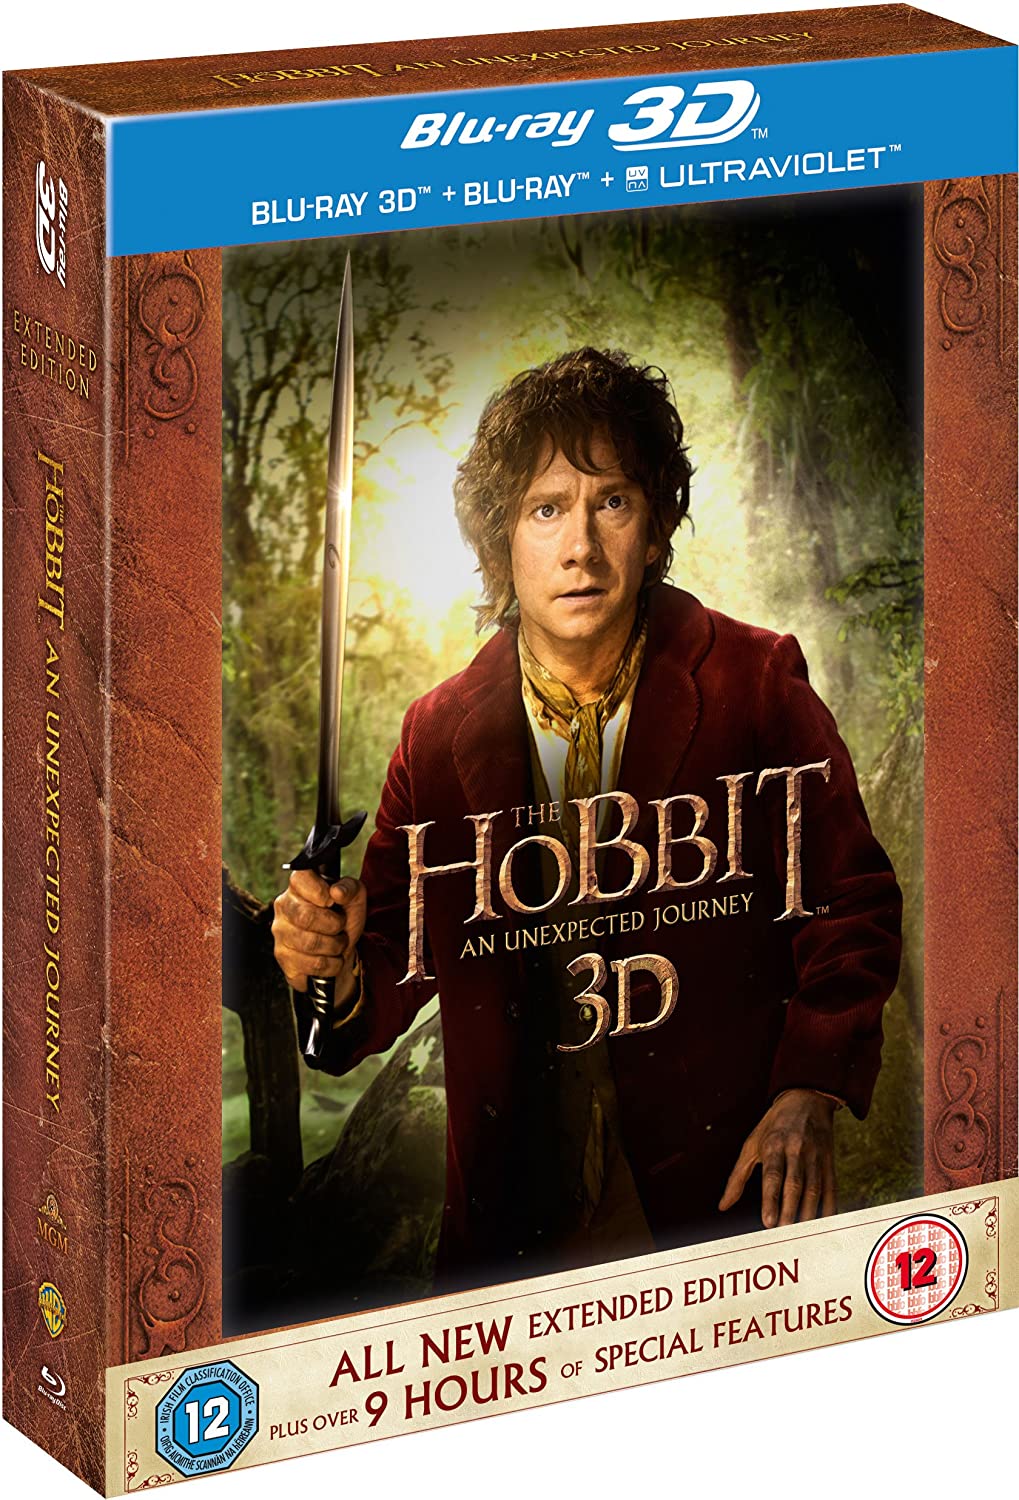 The Hobbit: An Unexpected Journey - Extended Edition [Blu-ray 3D + Blu-ray] [201